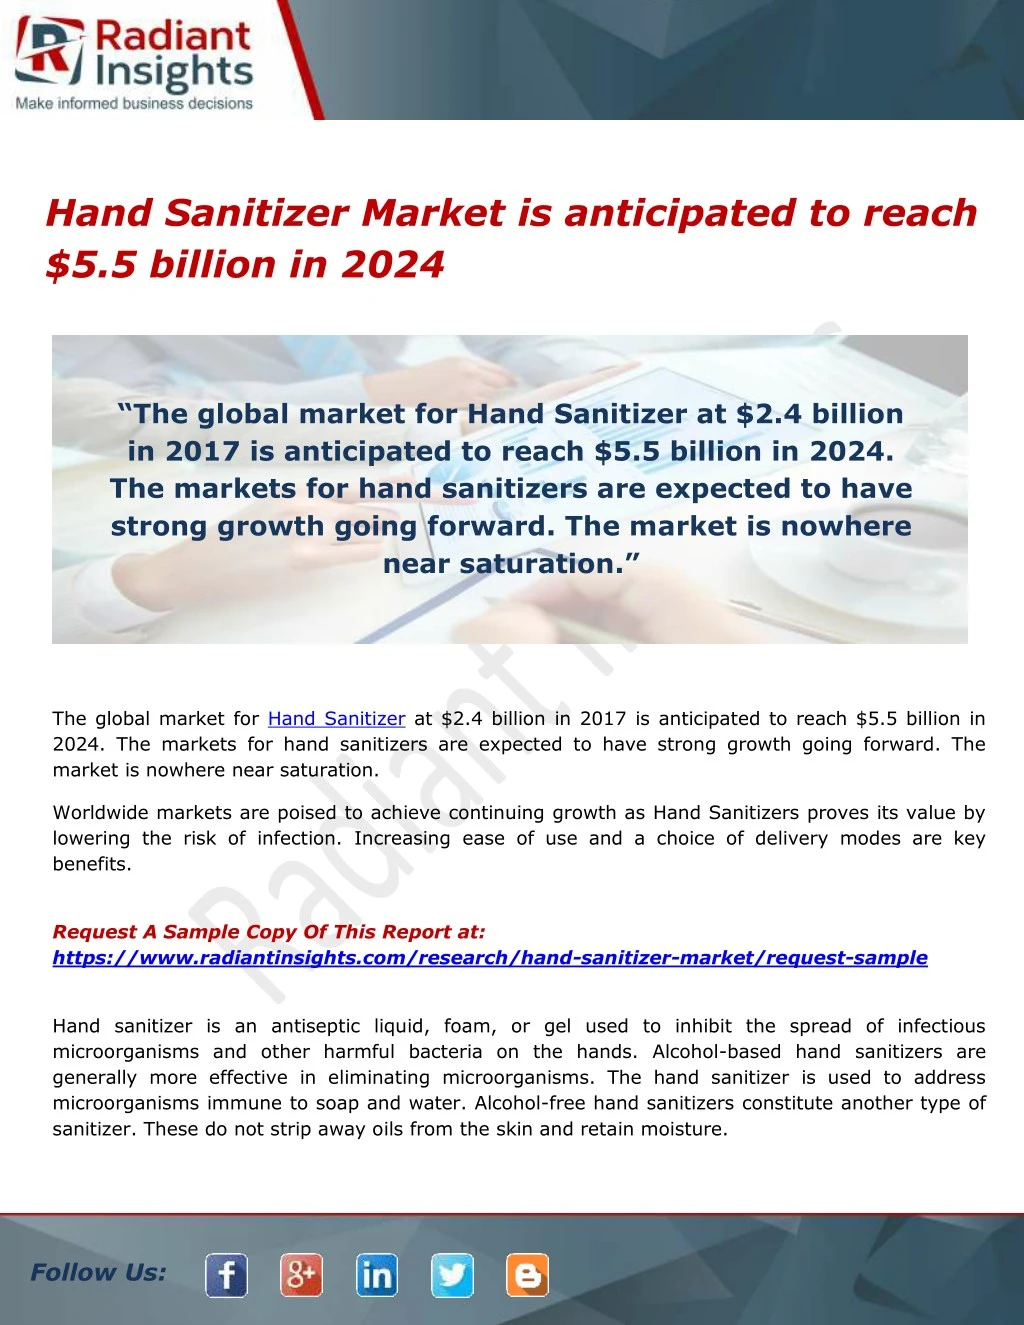 hand sanitizer market is anticipated to reach